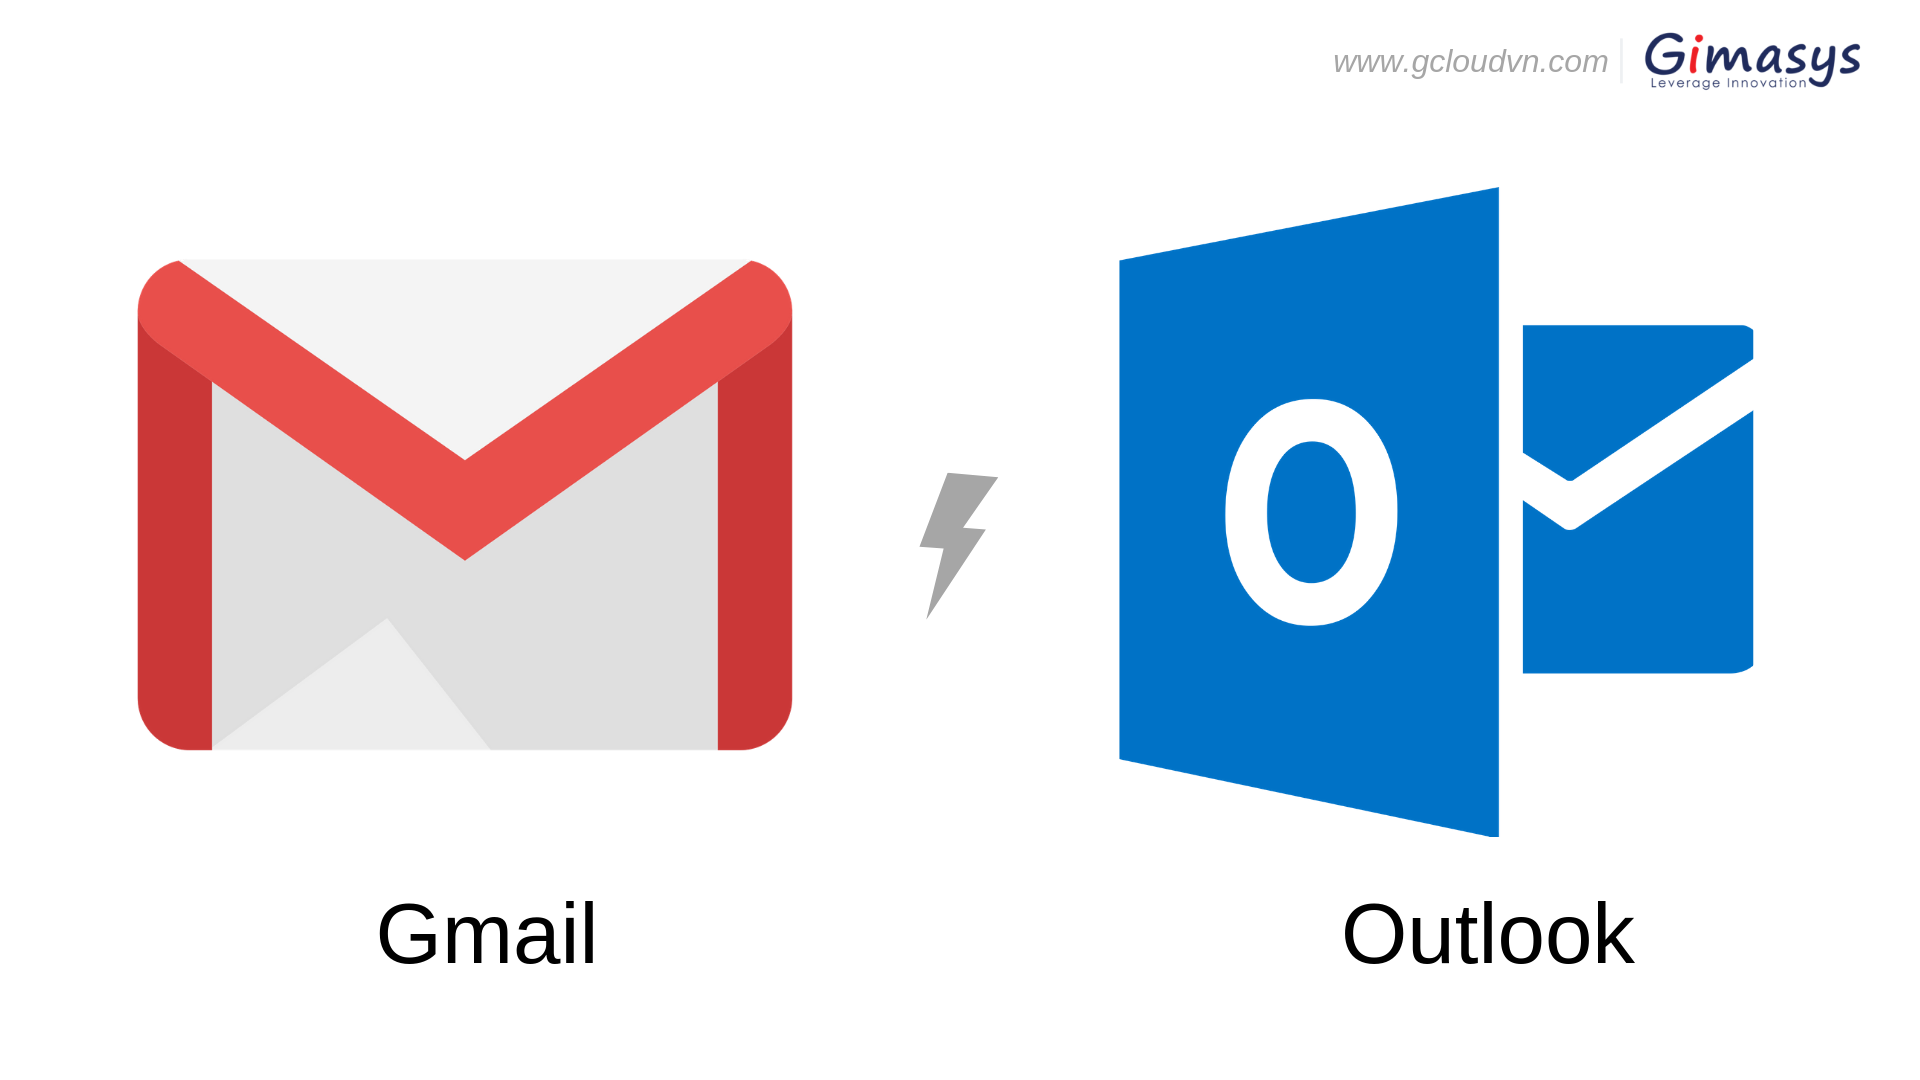 Email doanh nghiệp: So sánh G Suite và Office 365